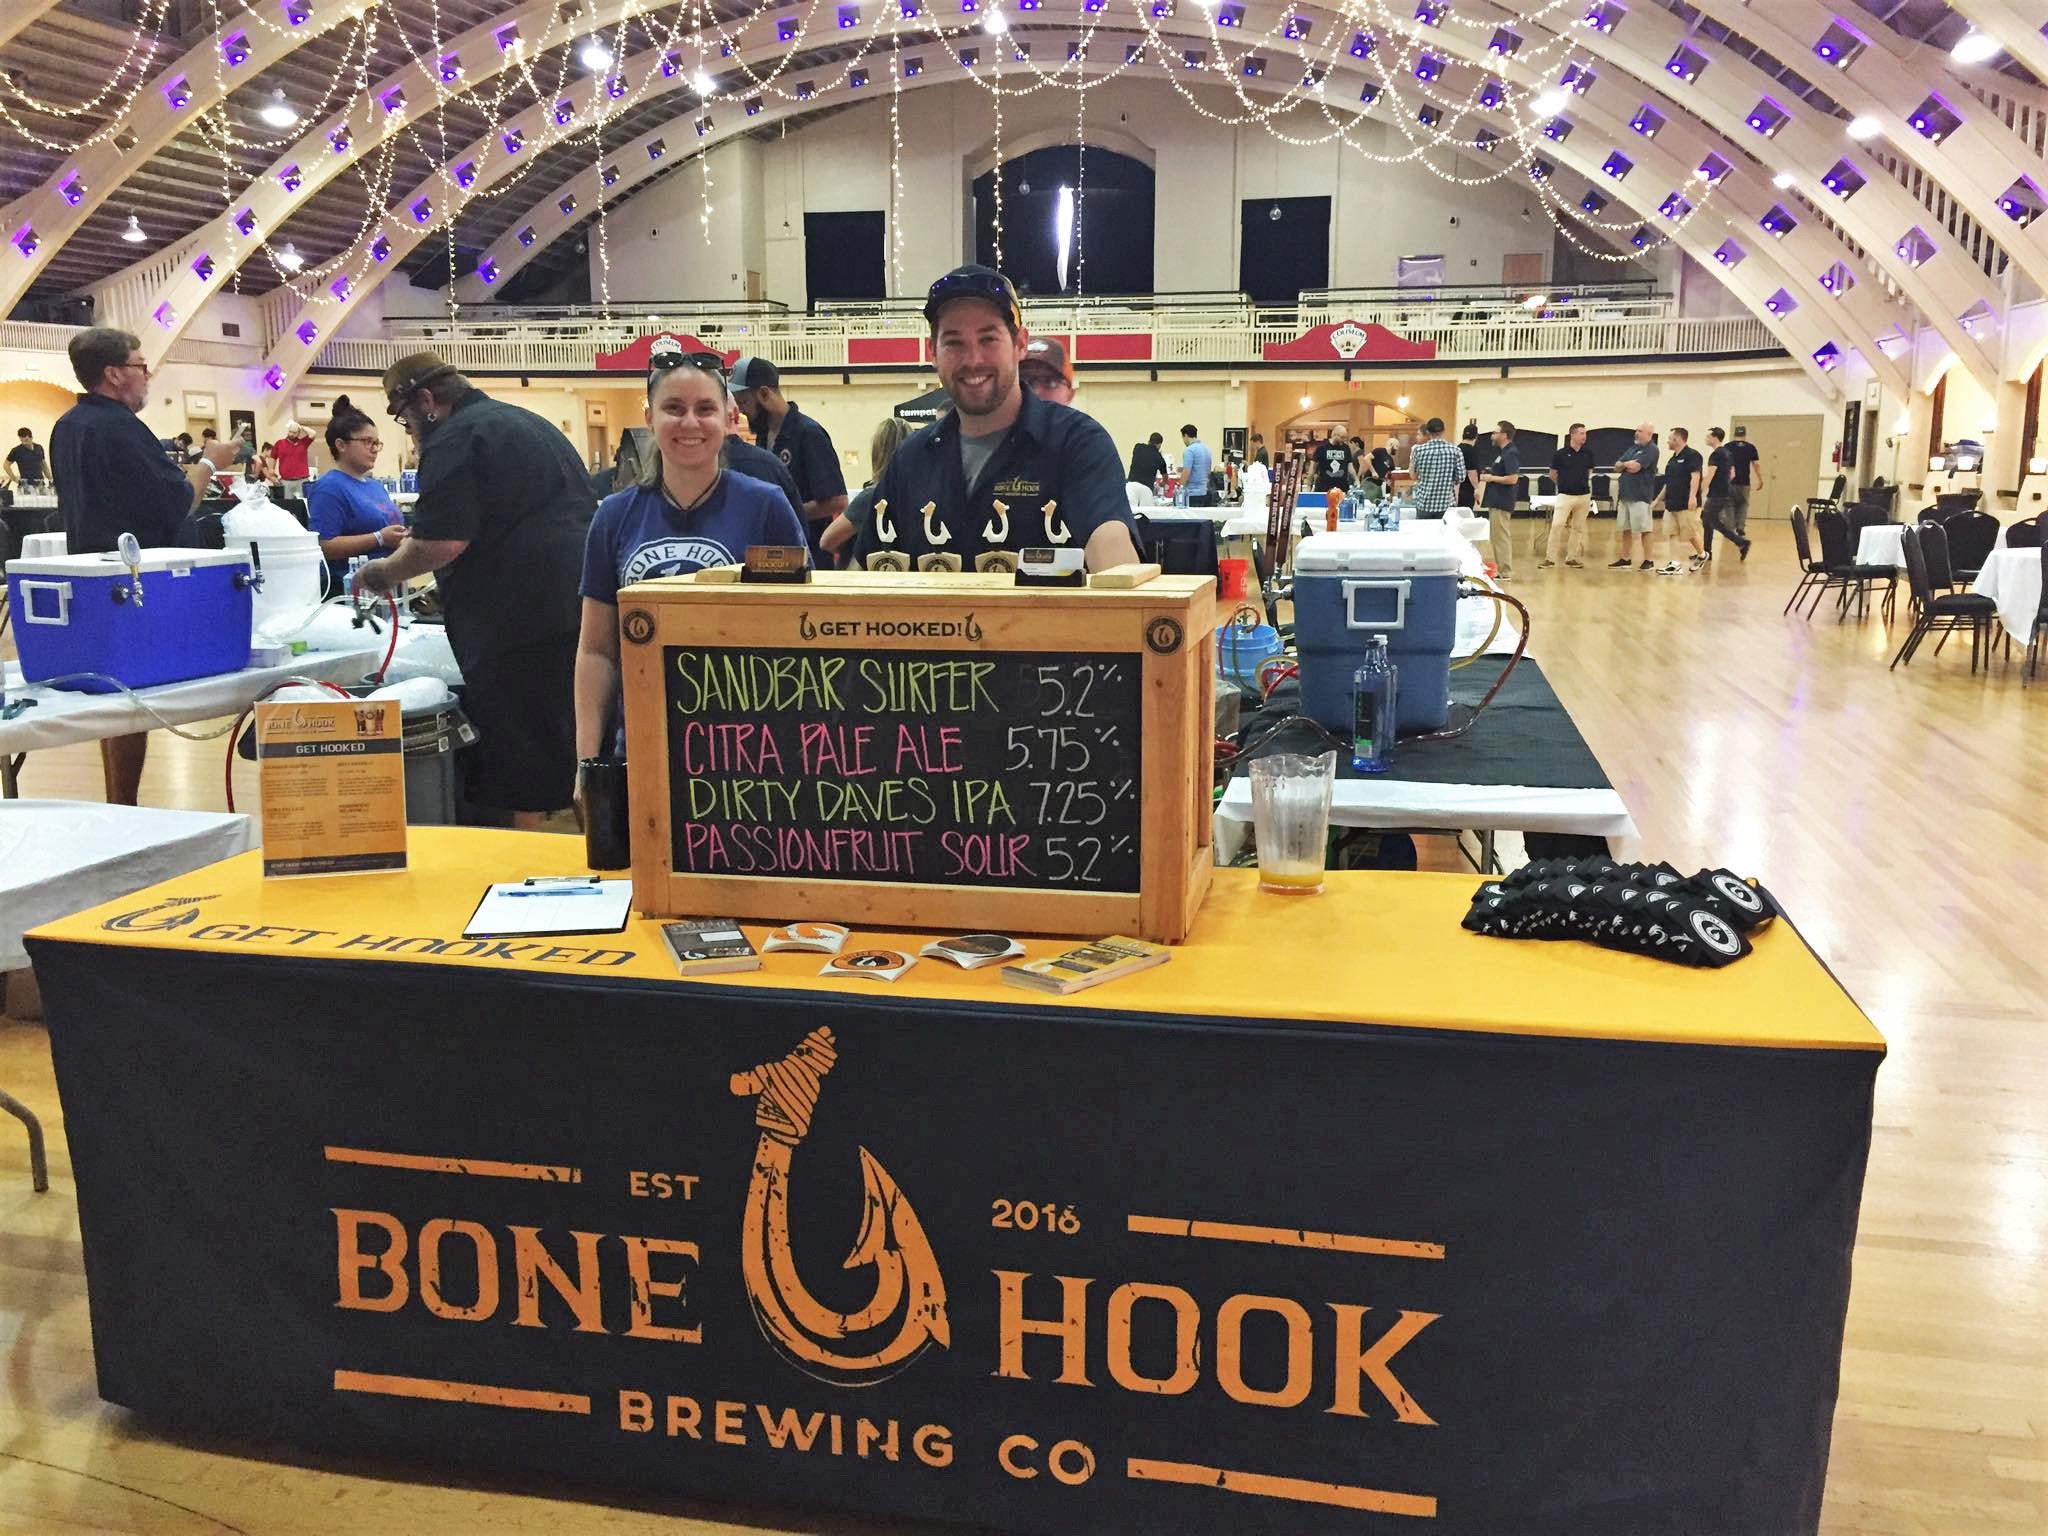 bone hook brewing company's booth with polyester table covered stand is completely wrinkle free